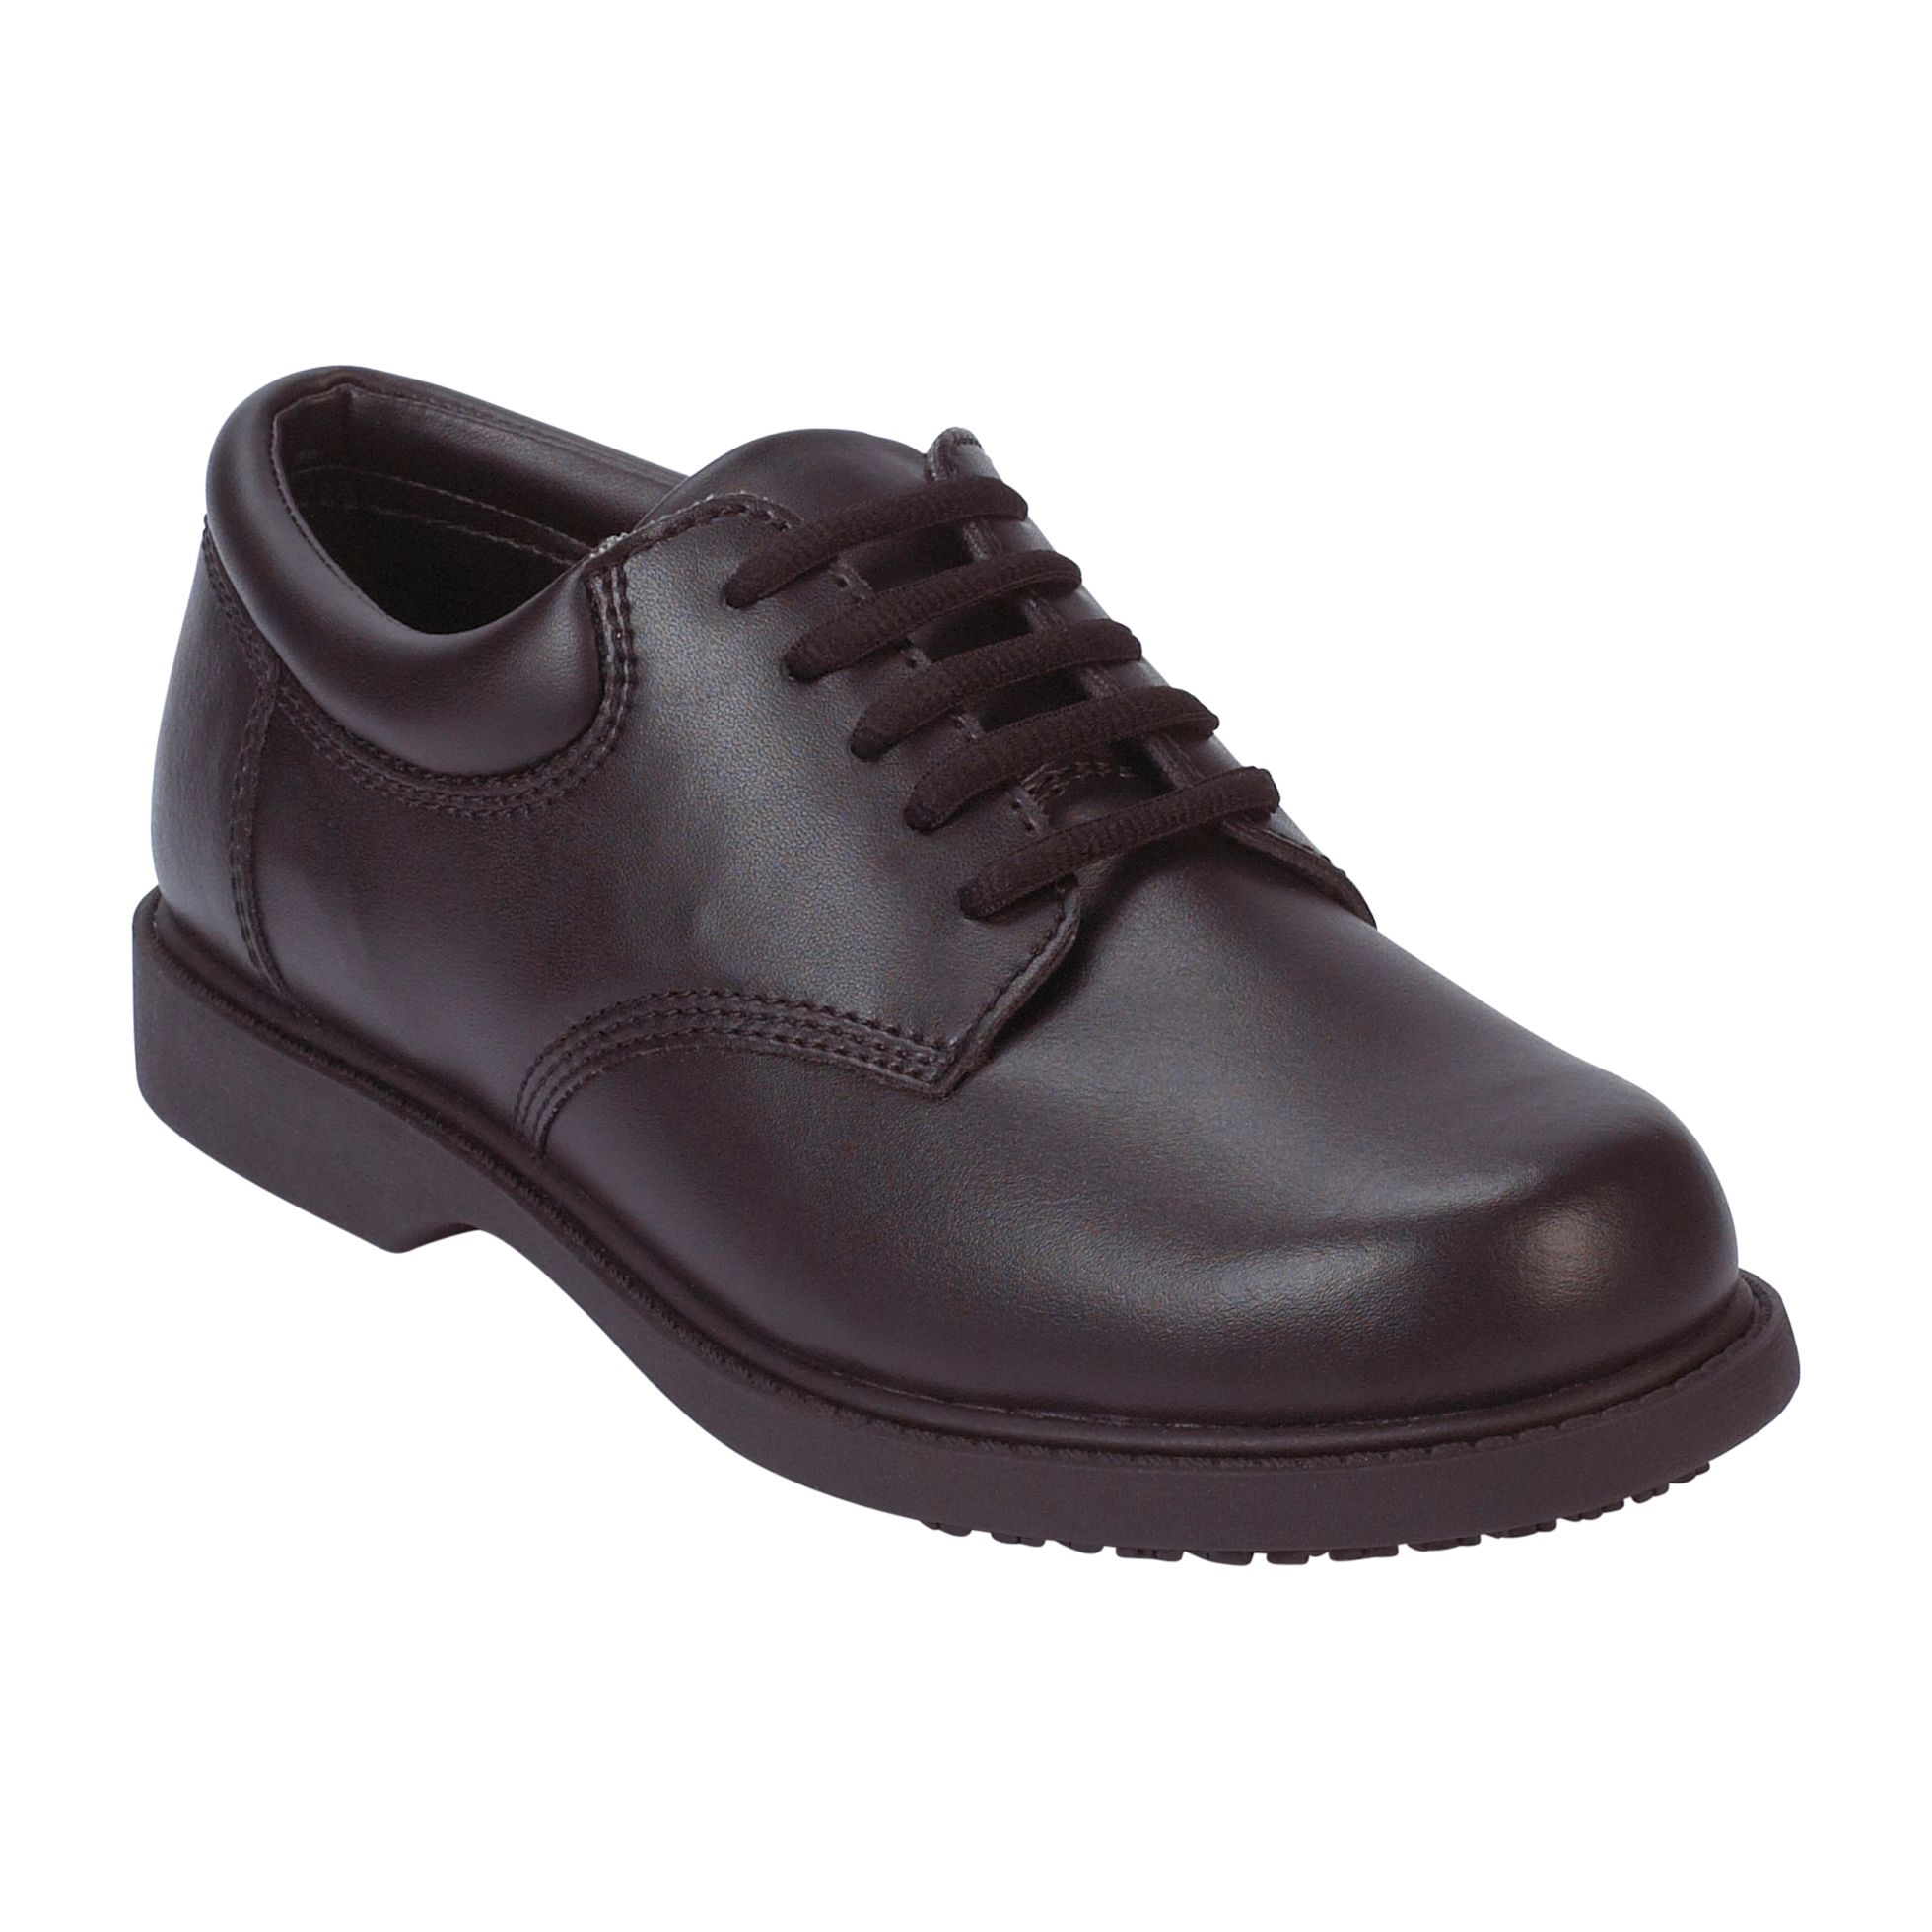 Safetrax Women's Kelsey Non-Skid Manager Oxford - Black